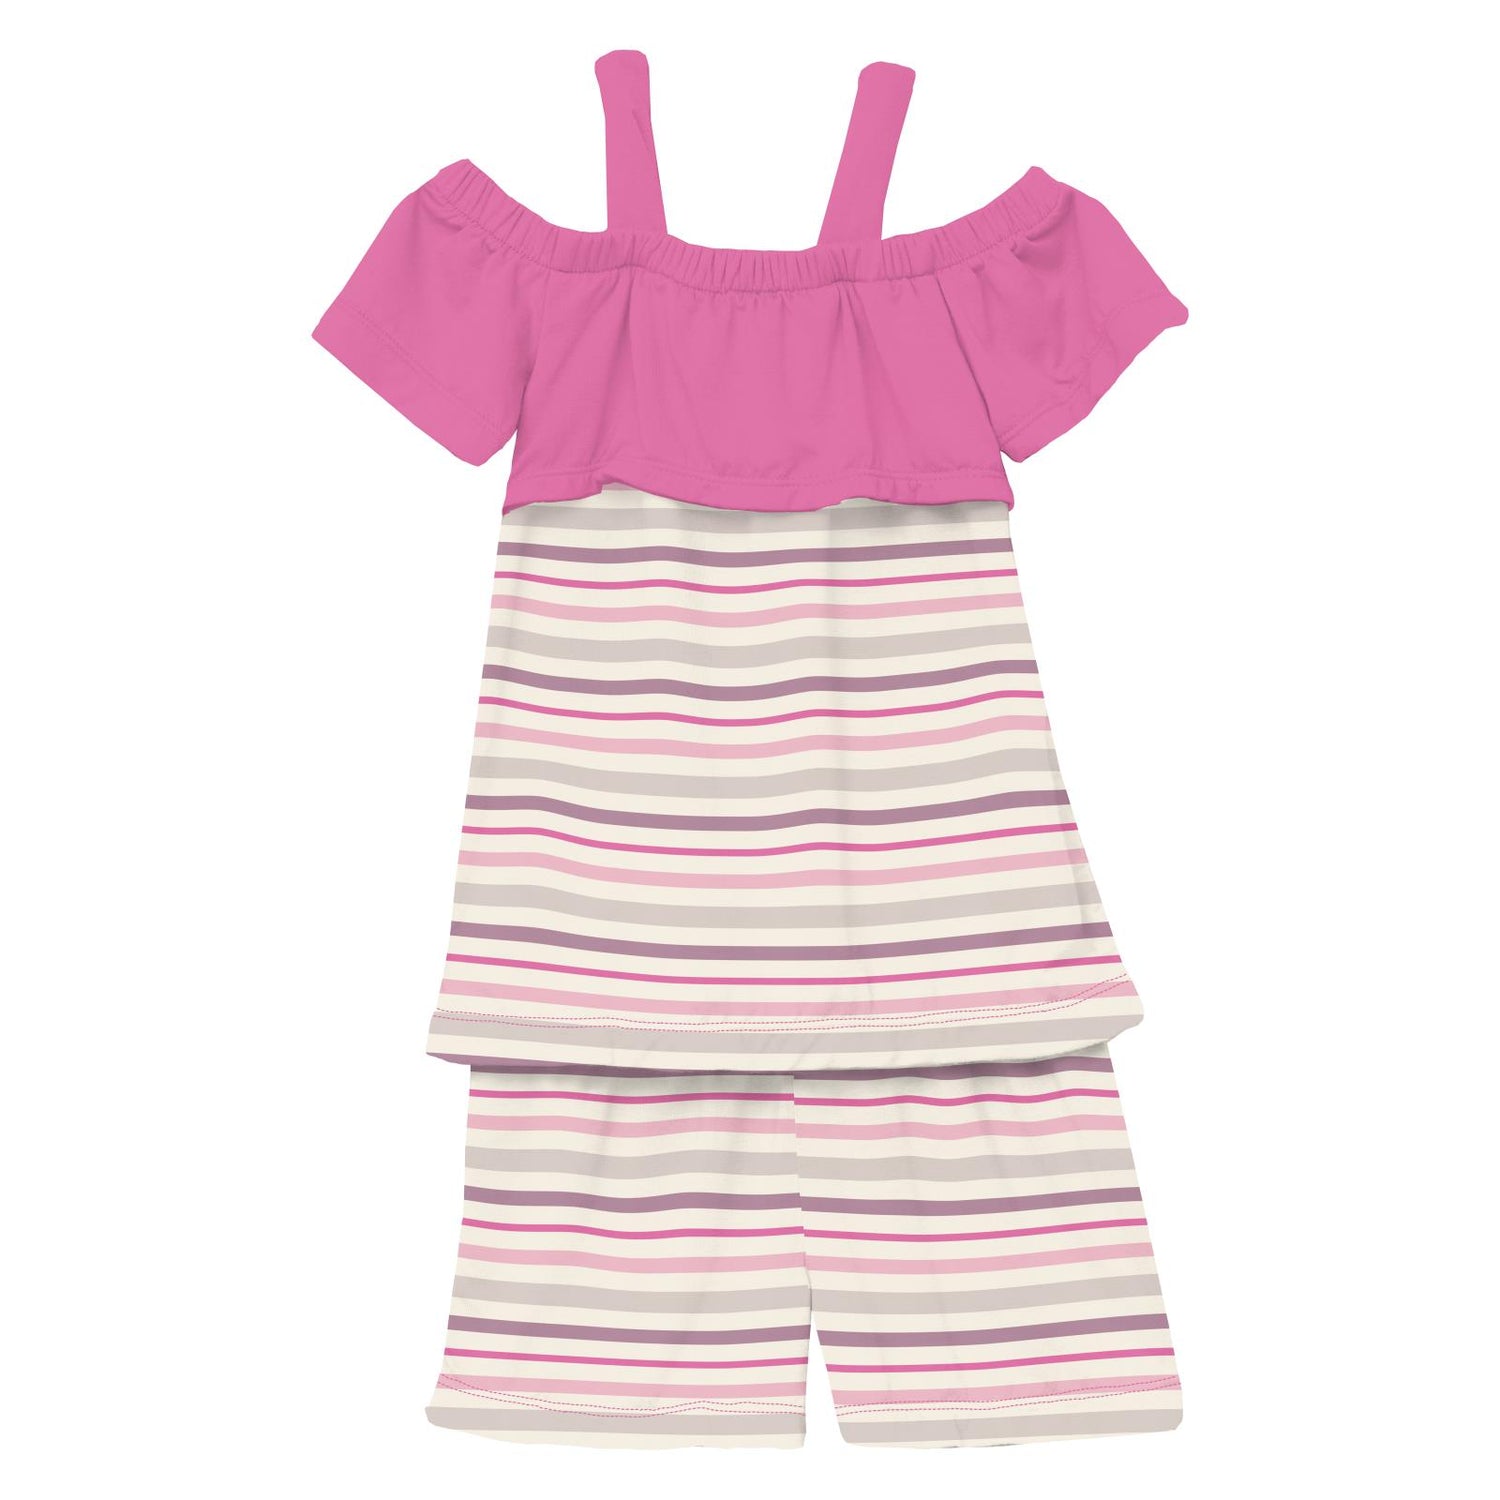 Print Off-Shoulder Outfit Set in Whimsical Stripe